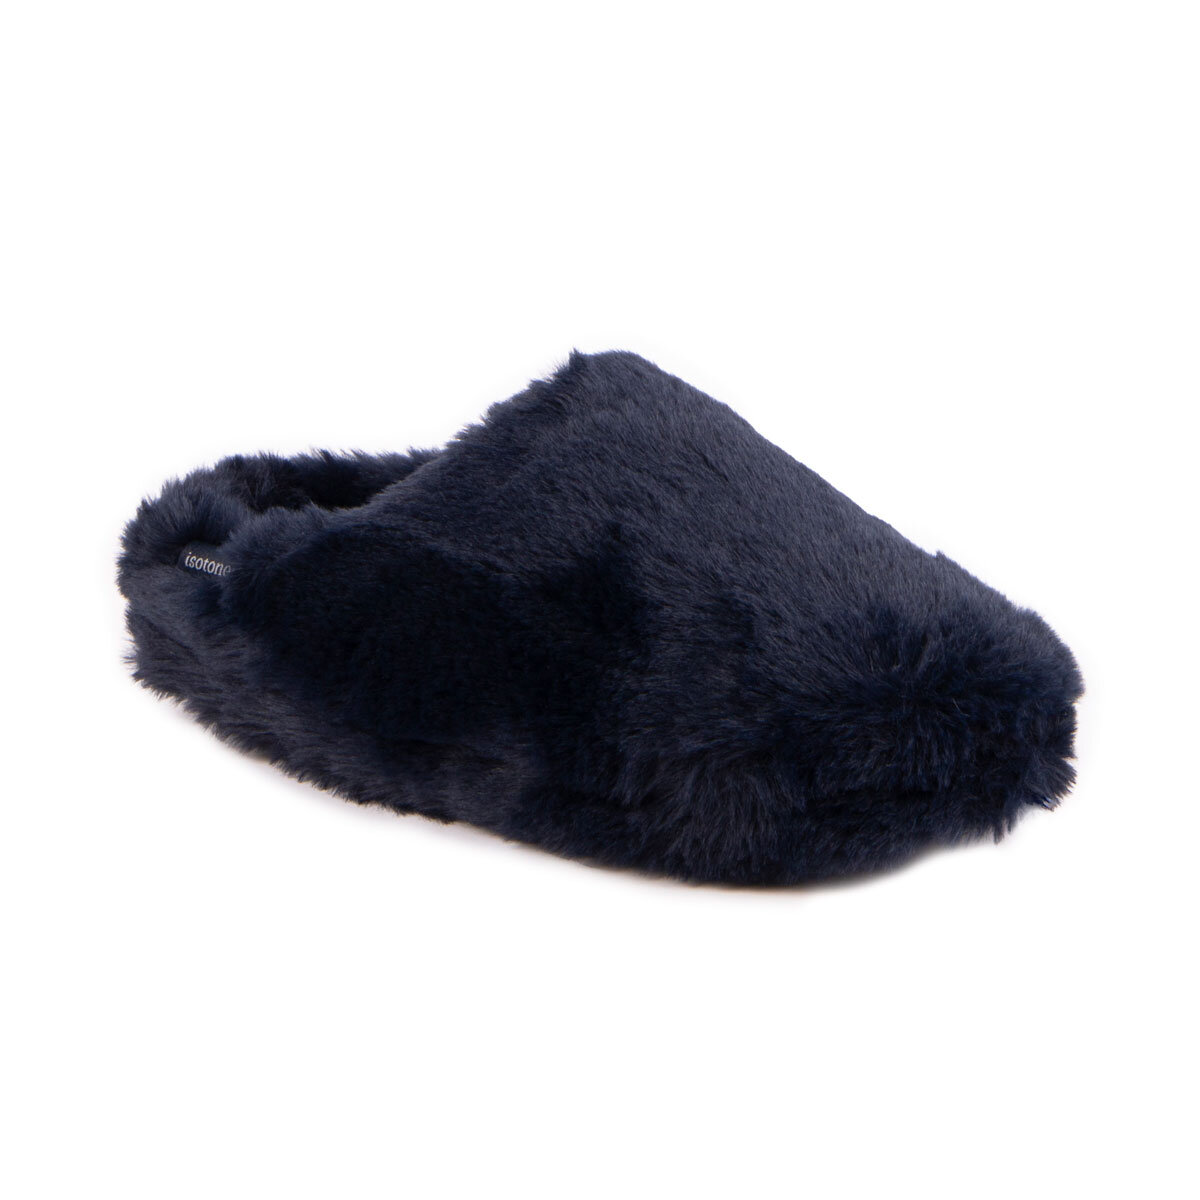 Totes Isotoner Pillowstep Women's Mule Slippers in Navy